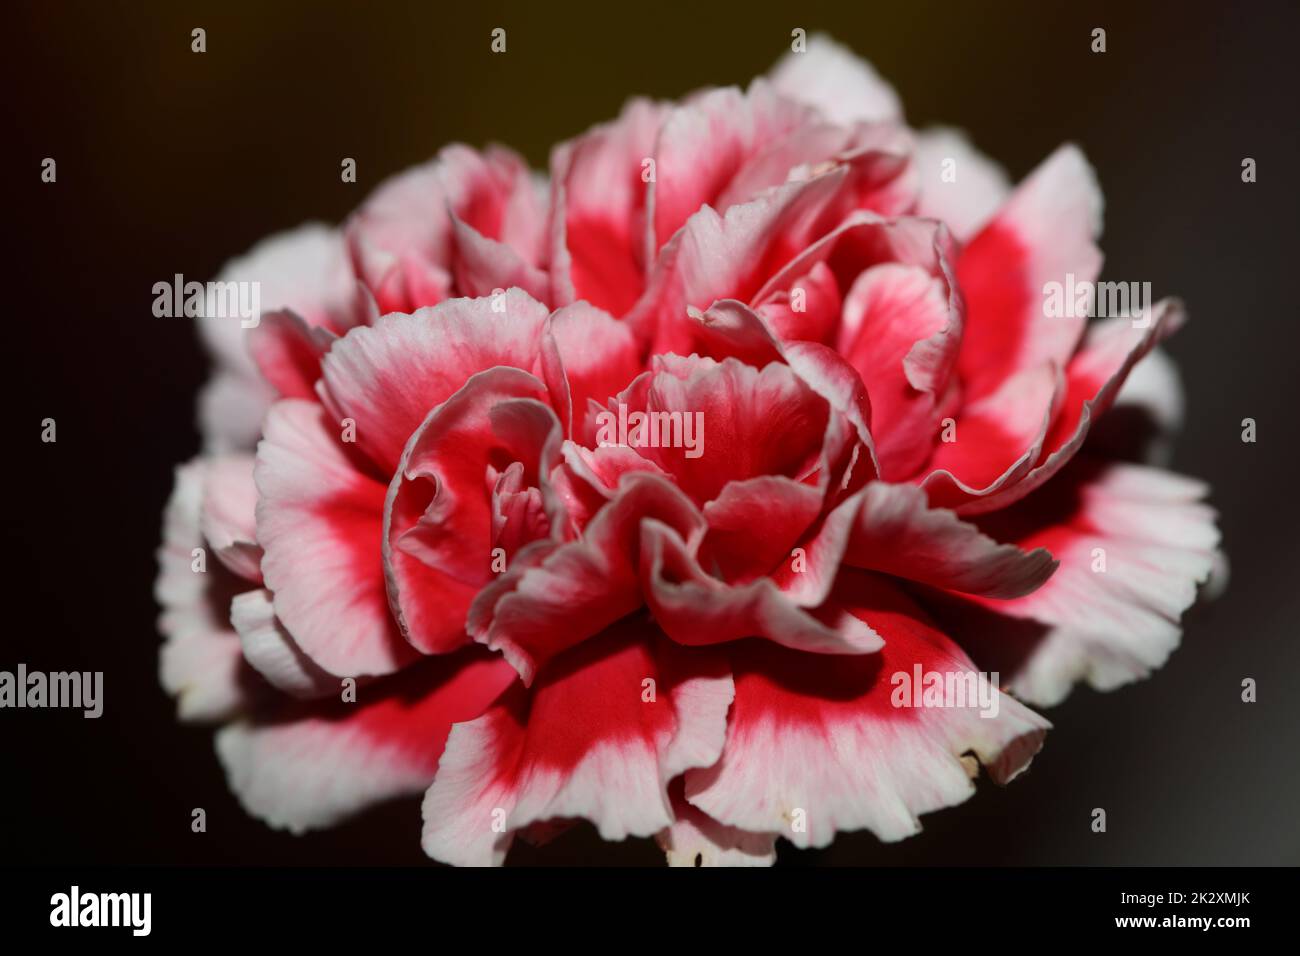 Red flower blossoms close up dianthus caryophyllus family caryophyllaceae botanical background modern high quality big size print Stock Photo